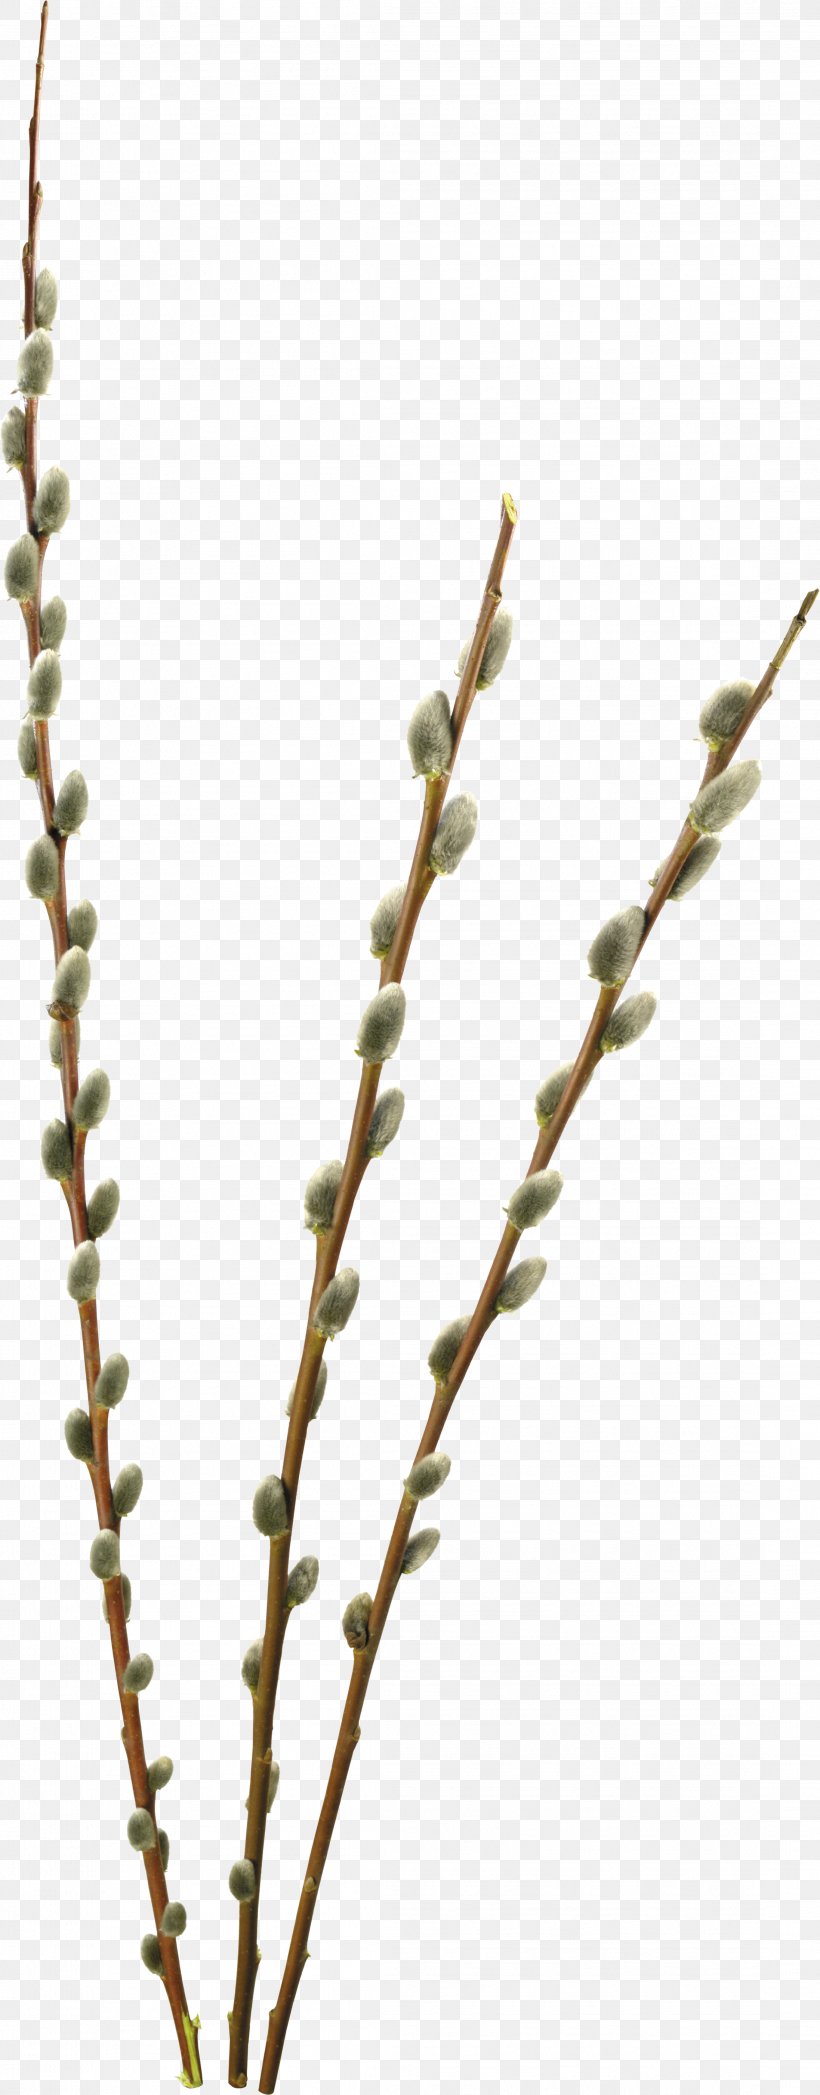 Willow Information Digital Image Clip Art, PNG, 2194x5607px, Willow, Branch, Digital Image, Drawing, Grass Download Free